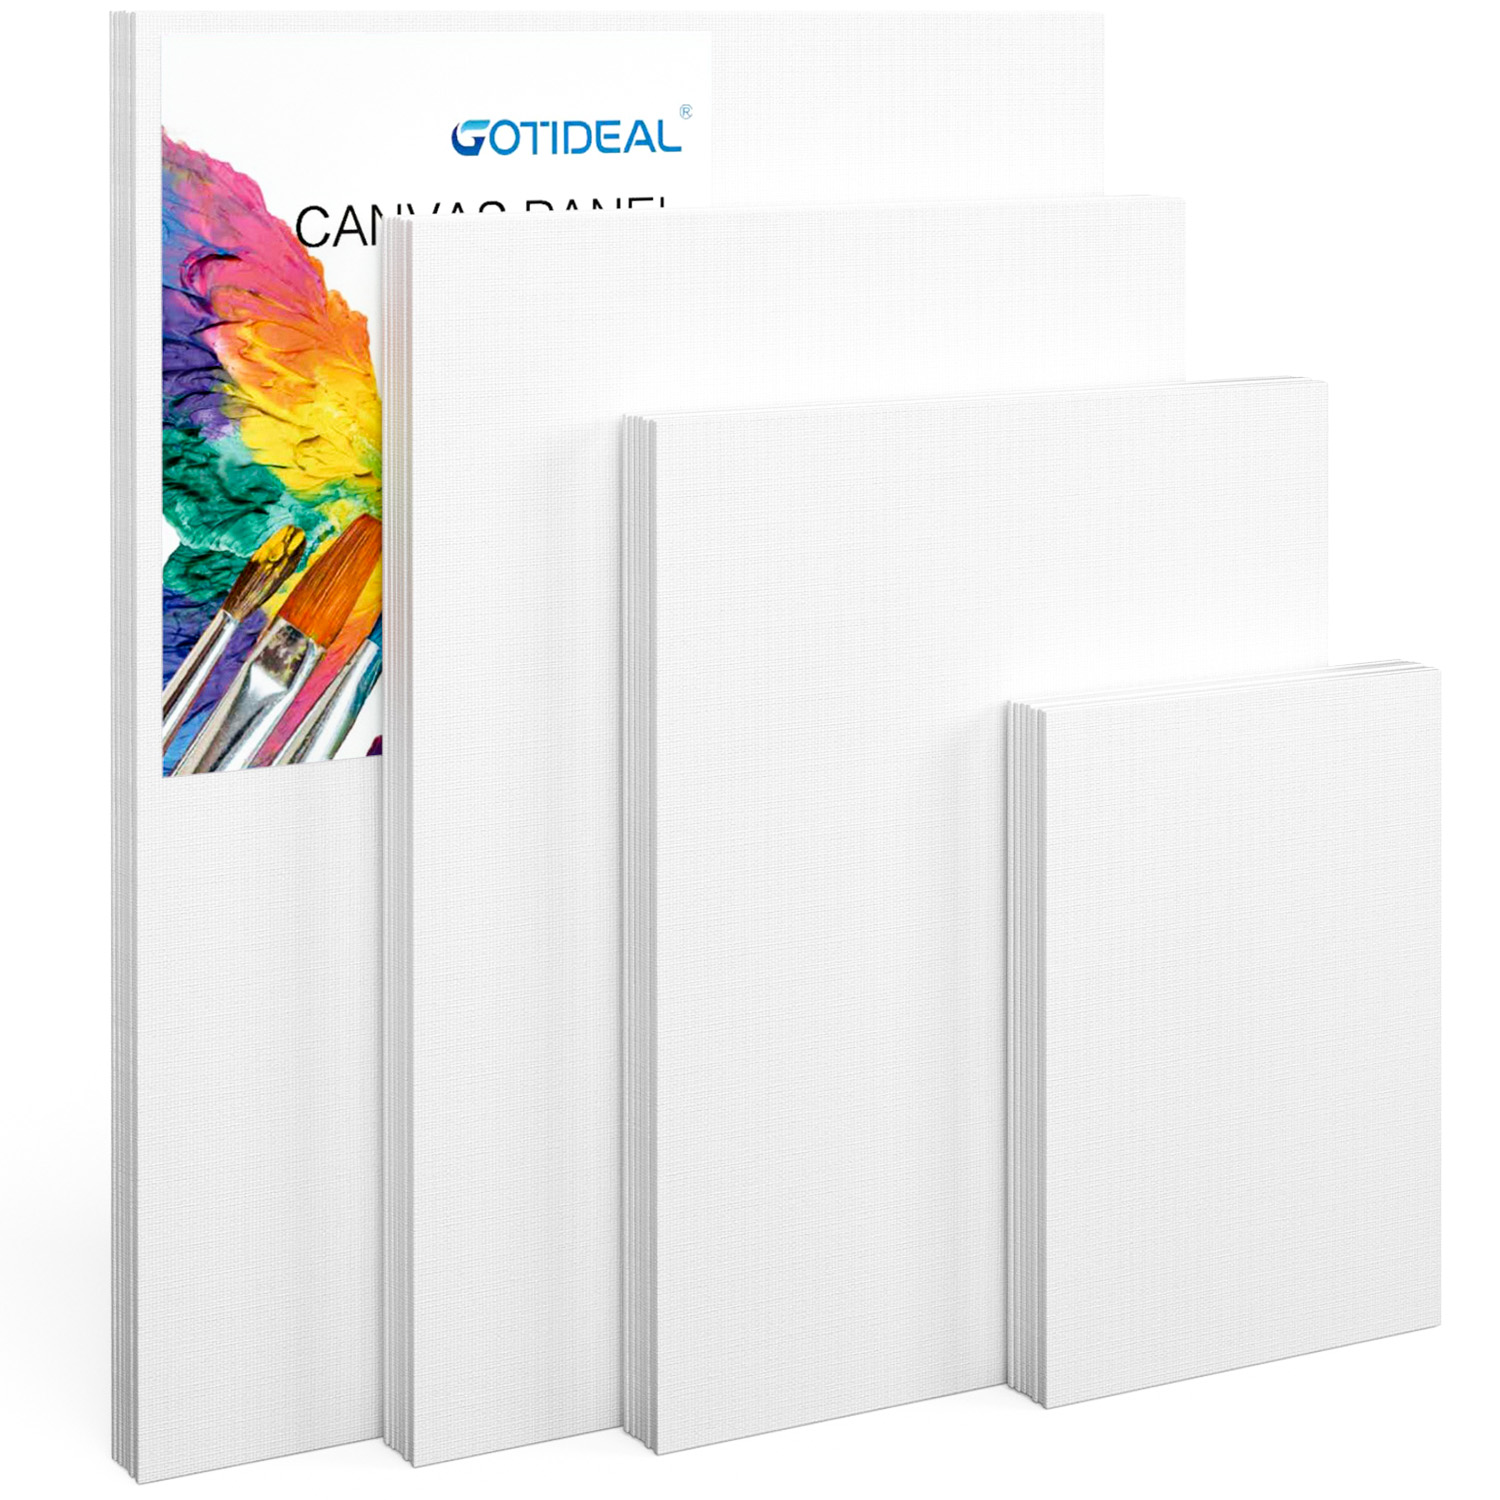 Painting Canvas Panels Multi Pack 9 of Each ,Set of 36,100% Cotton Artist Canvas Boards for Painting,Primed White Canvas,for Acrylic,Oil Paint,Wet or Dry Art Media 5x7,8x10,9x12,11x14 